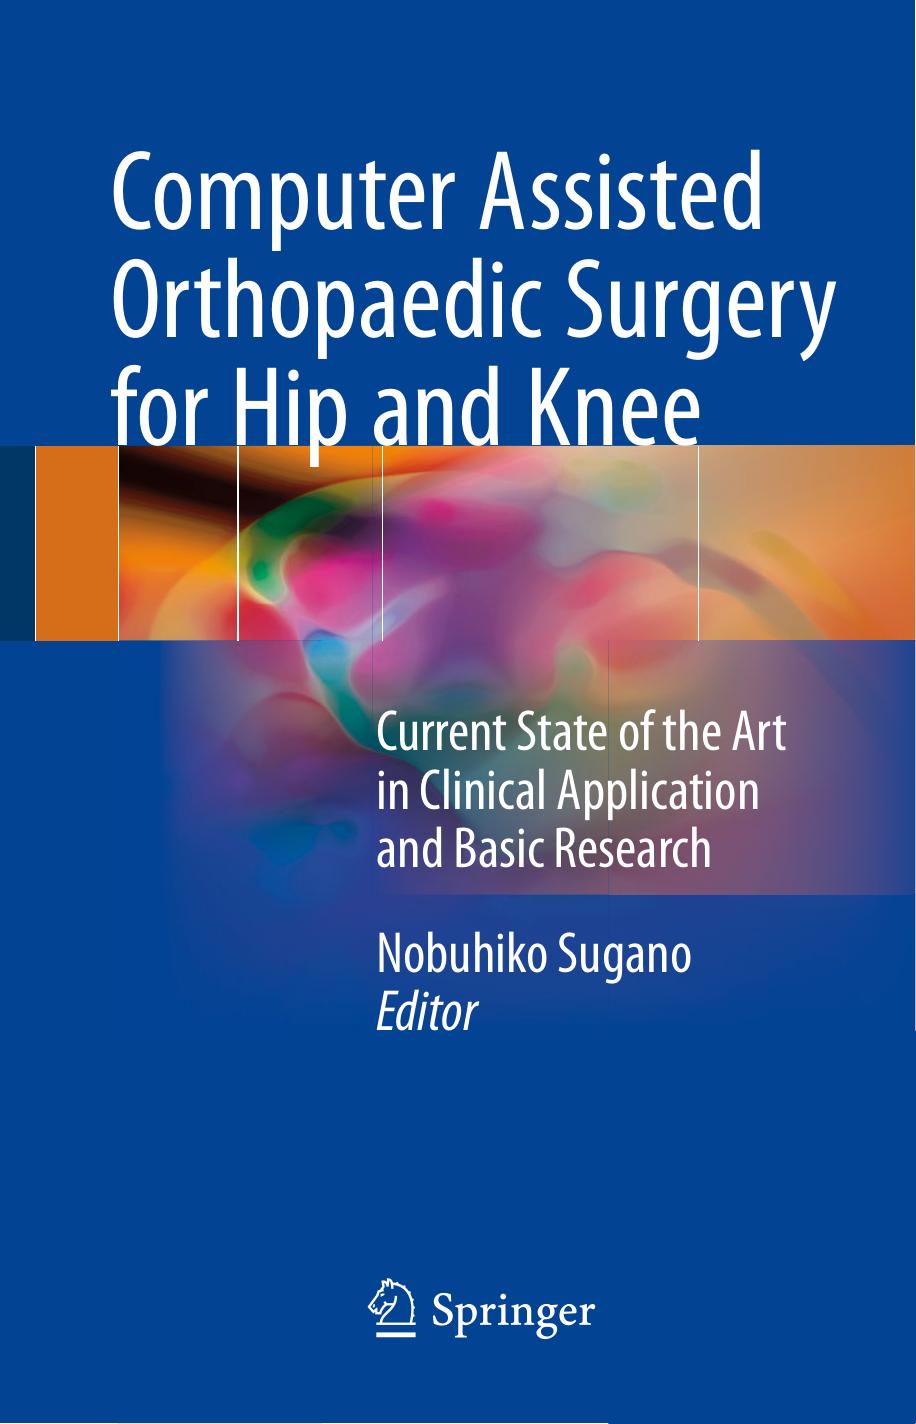 Computer Assisted Orthopaedic Surgery for Hip and Knee by Nobuhiko Sugano